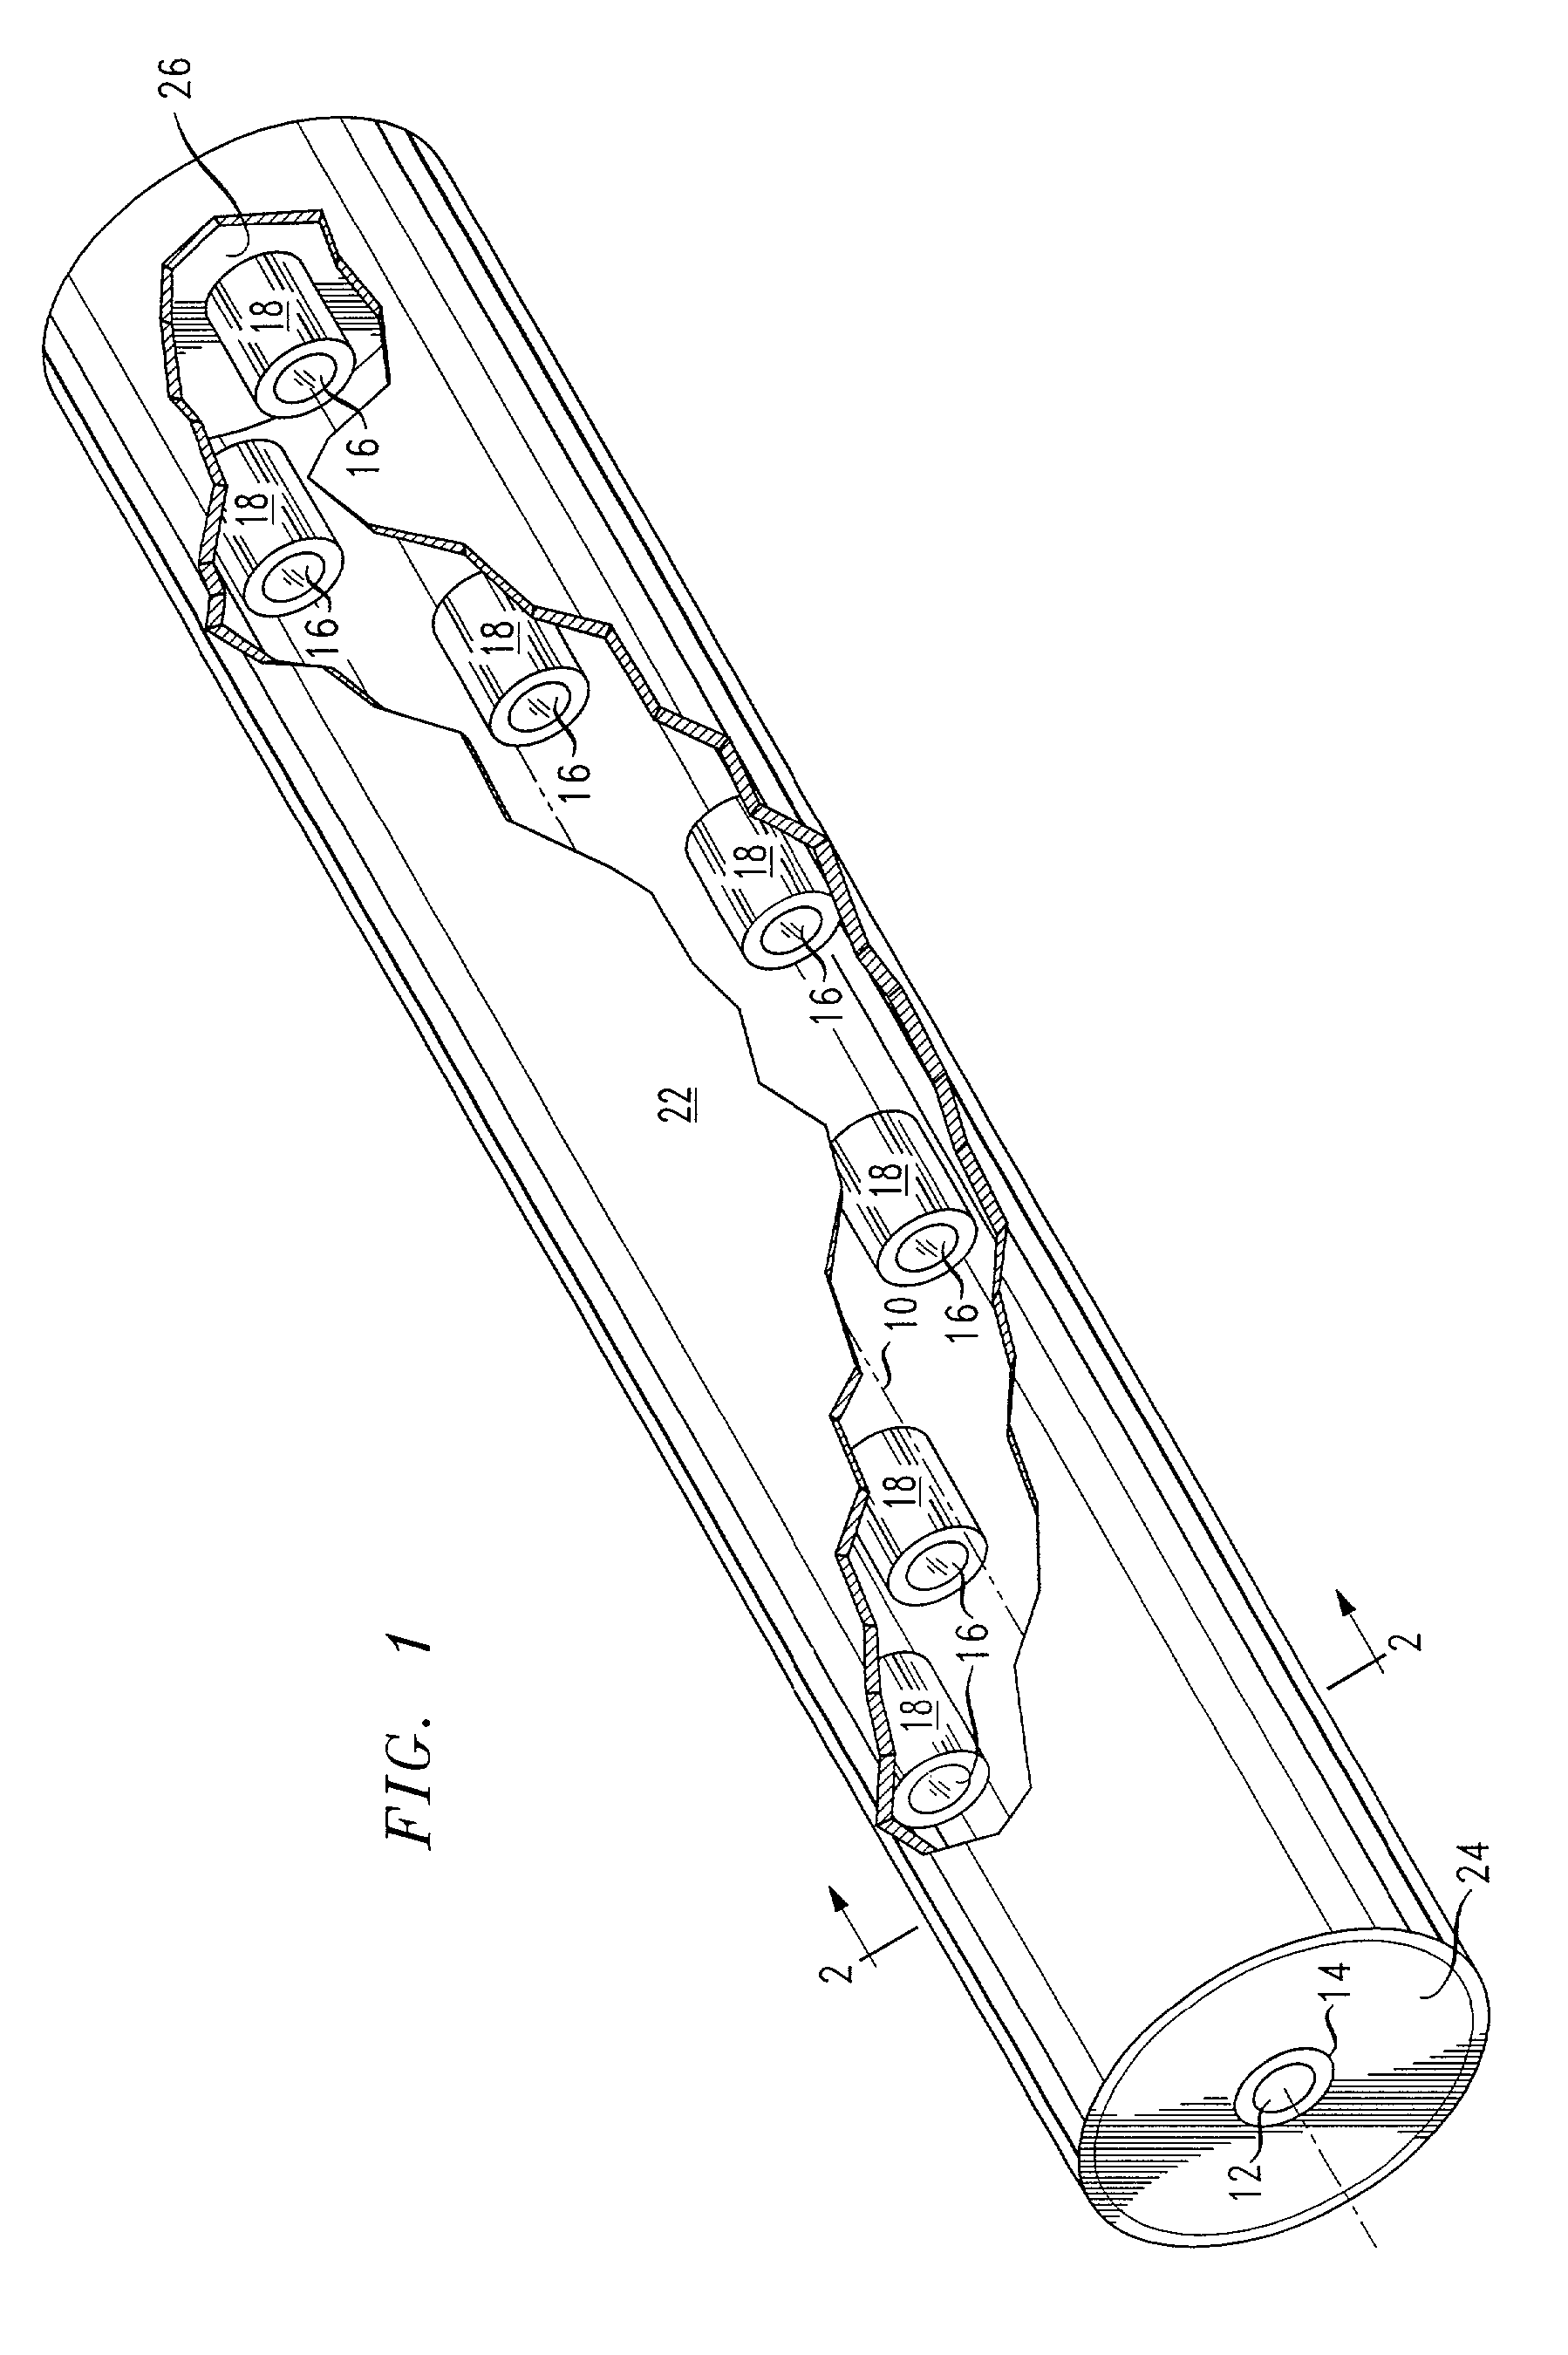 Interconnecting processing units of a stored program controlled system using space division multiplexed free space optics